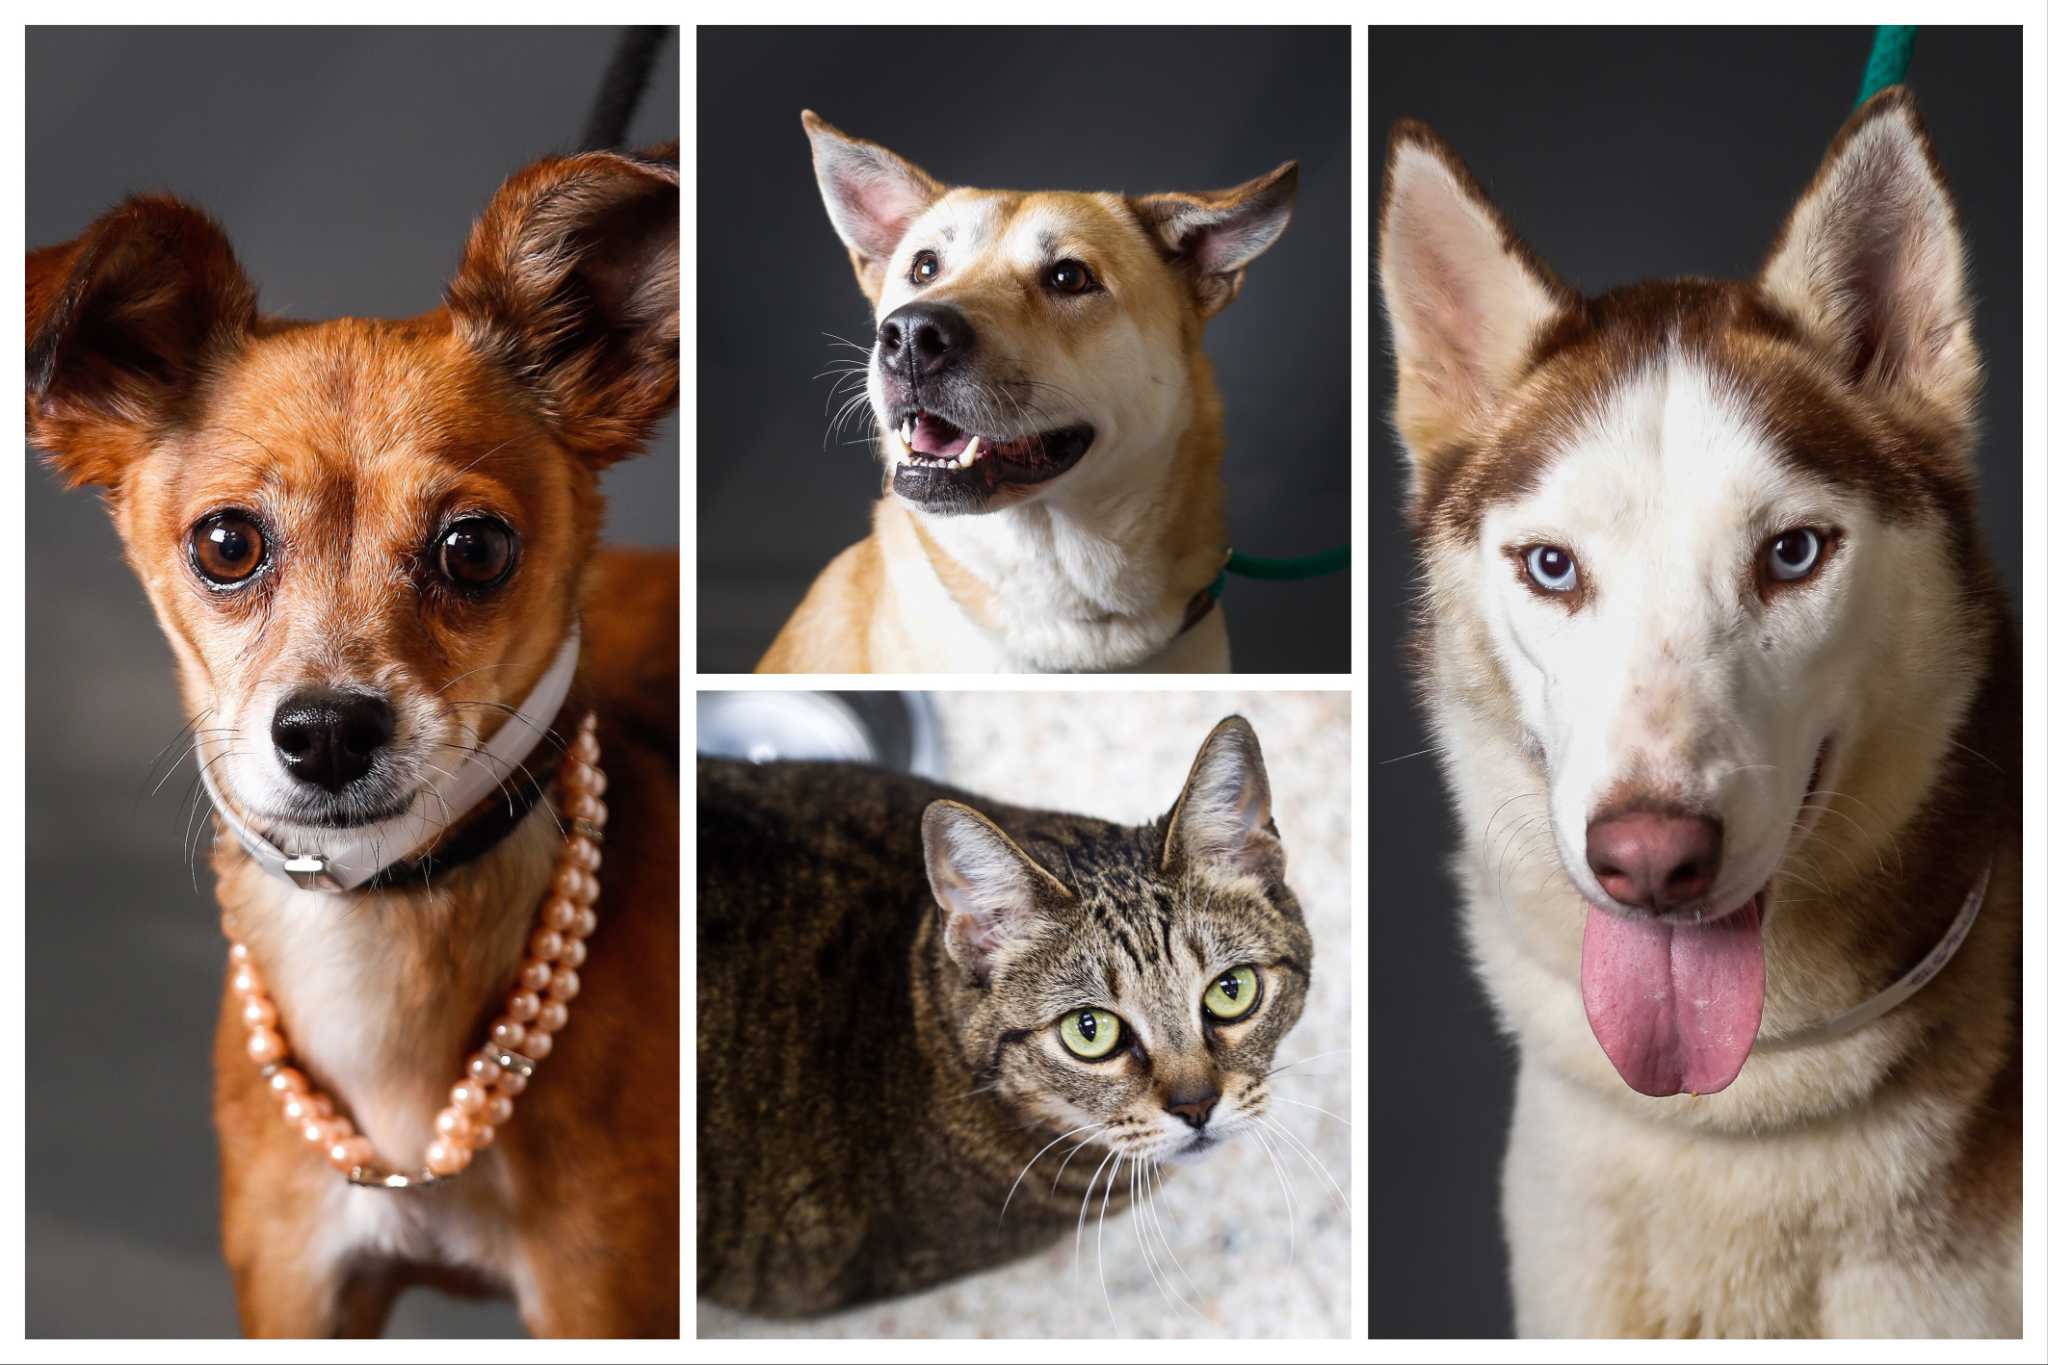  Humane  Society  slashes adoption  fees for dogs cats  at 